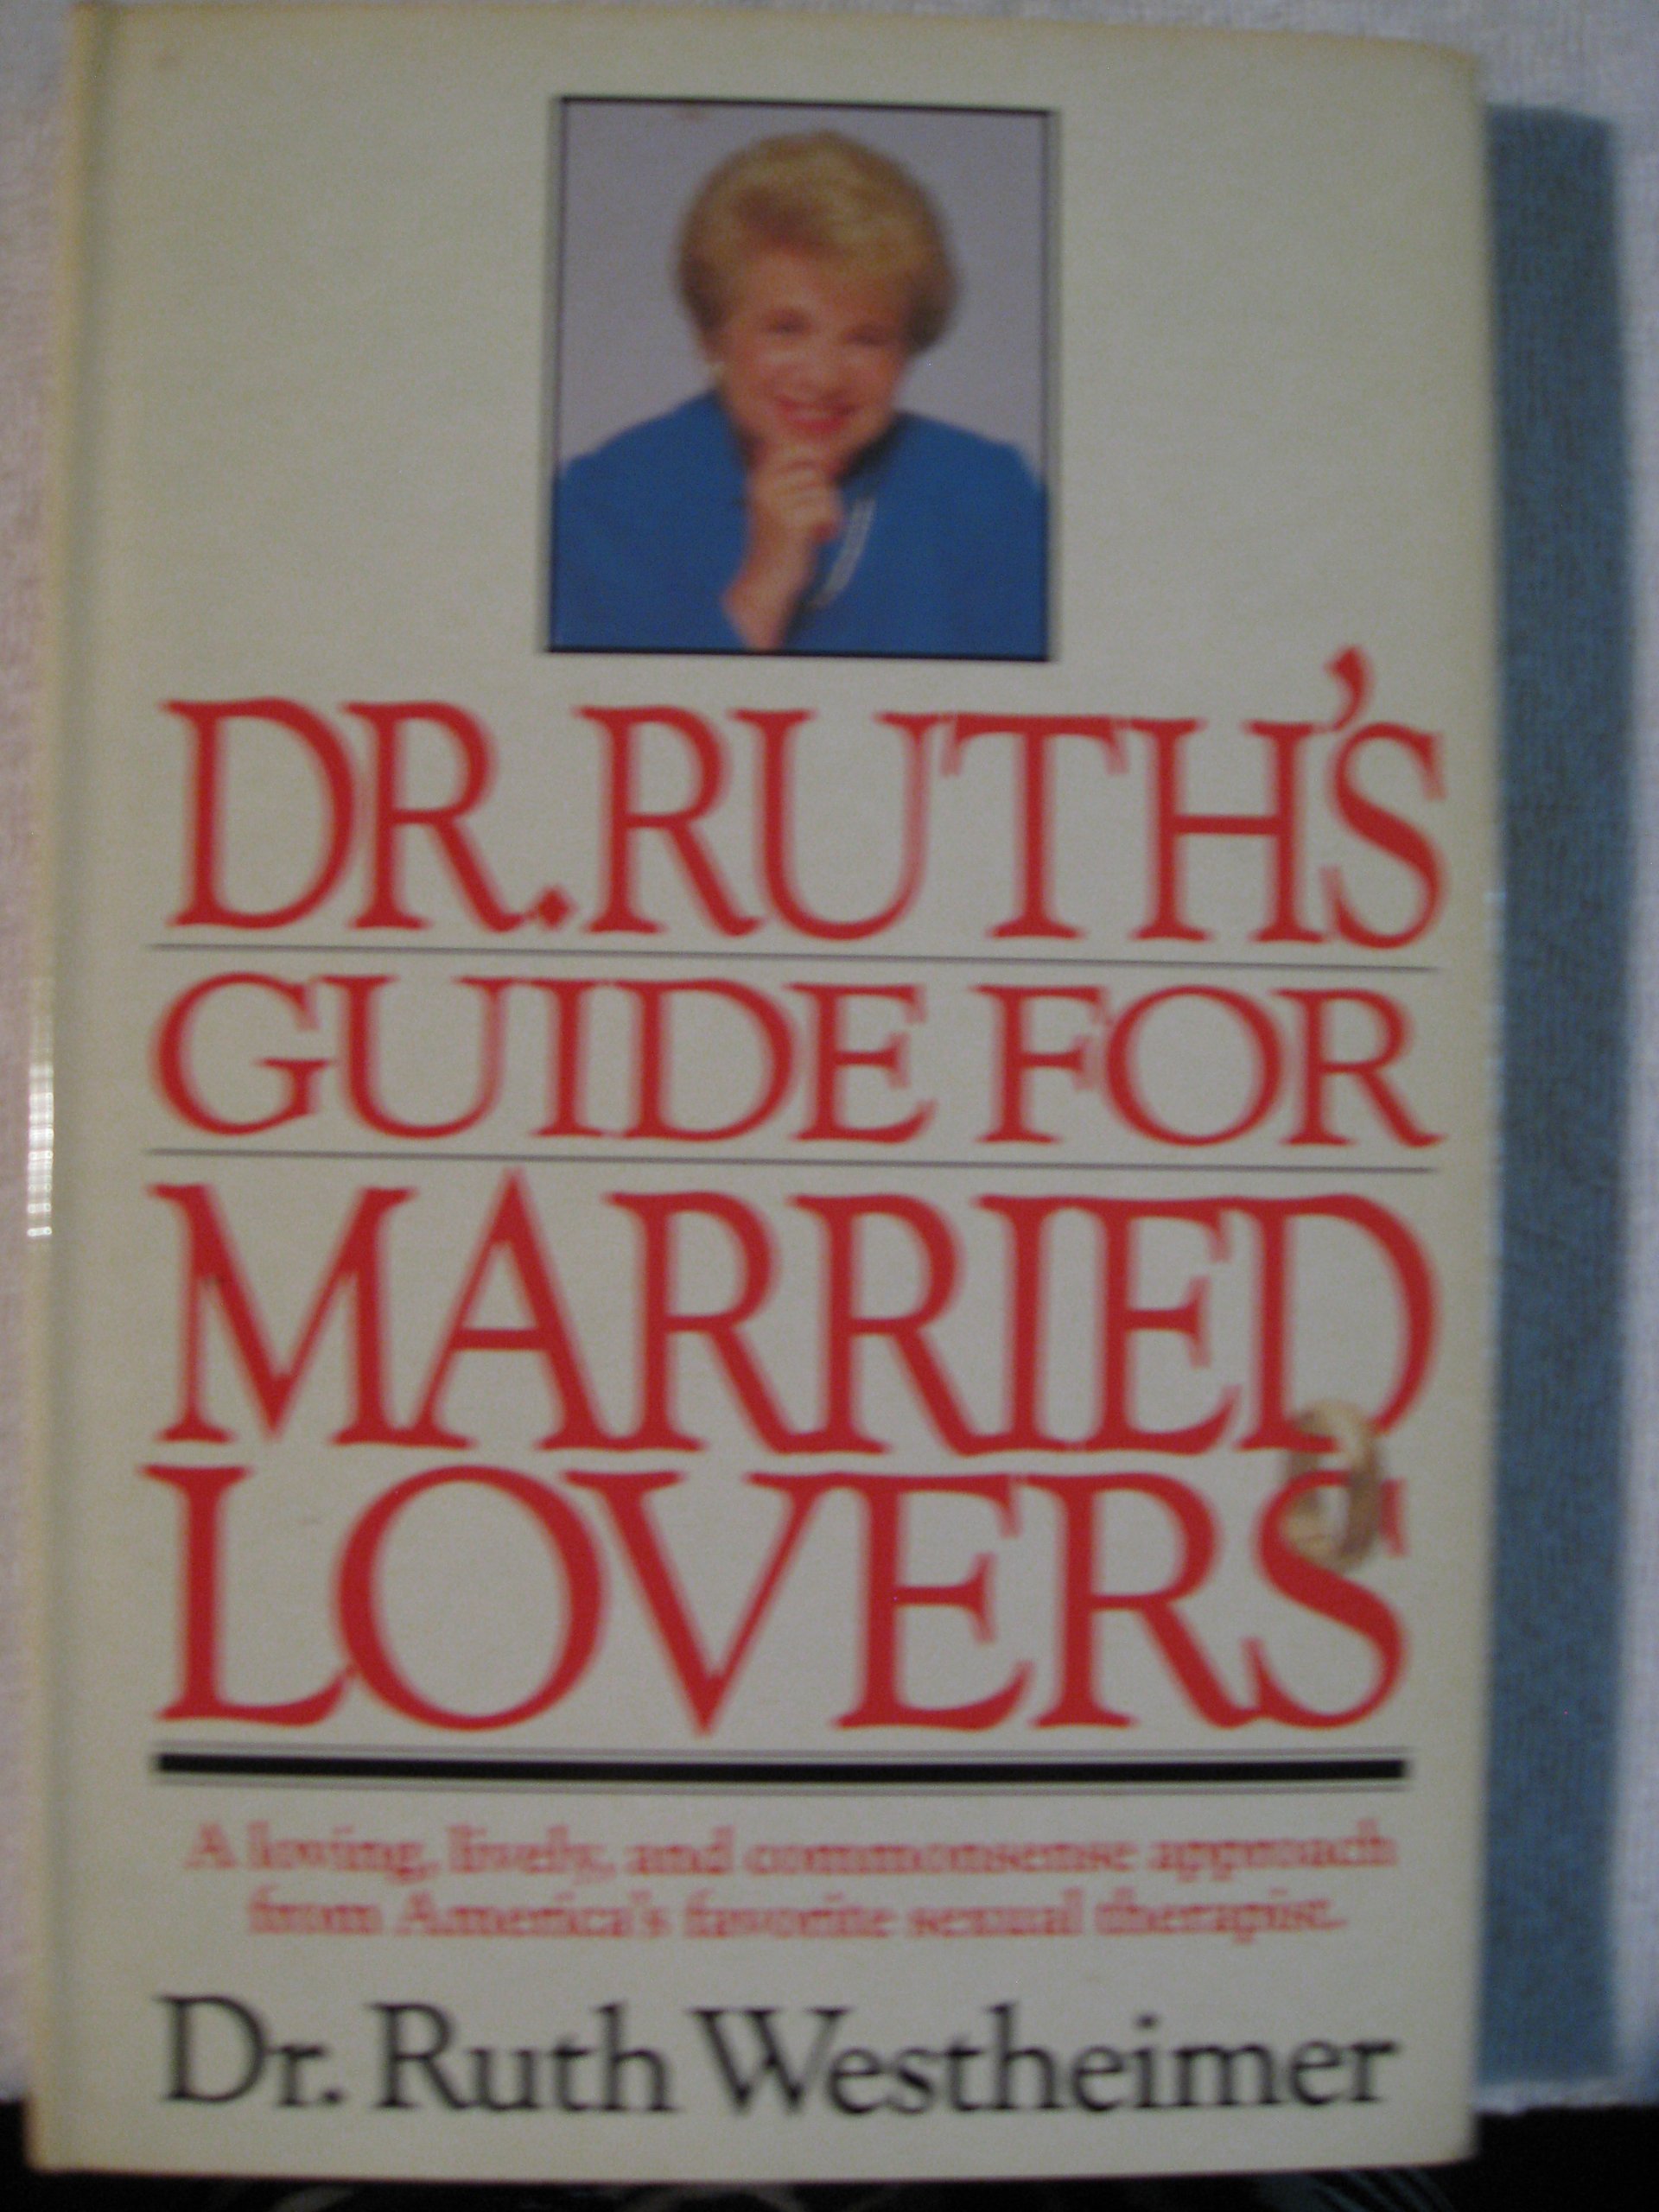 Dr. Ruth's guide to good sex magazine reviews